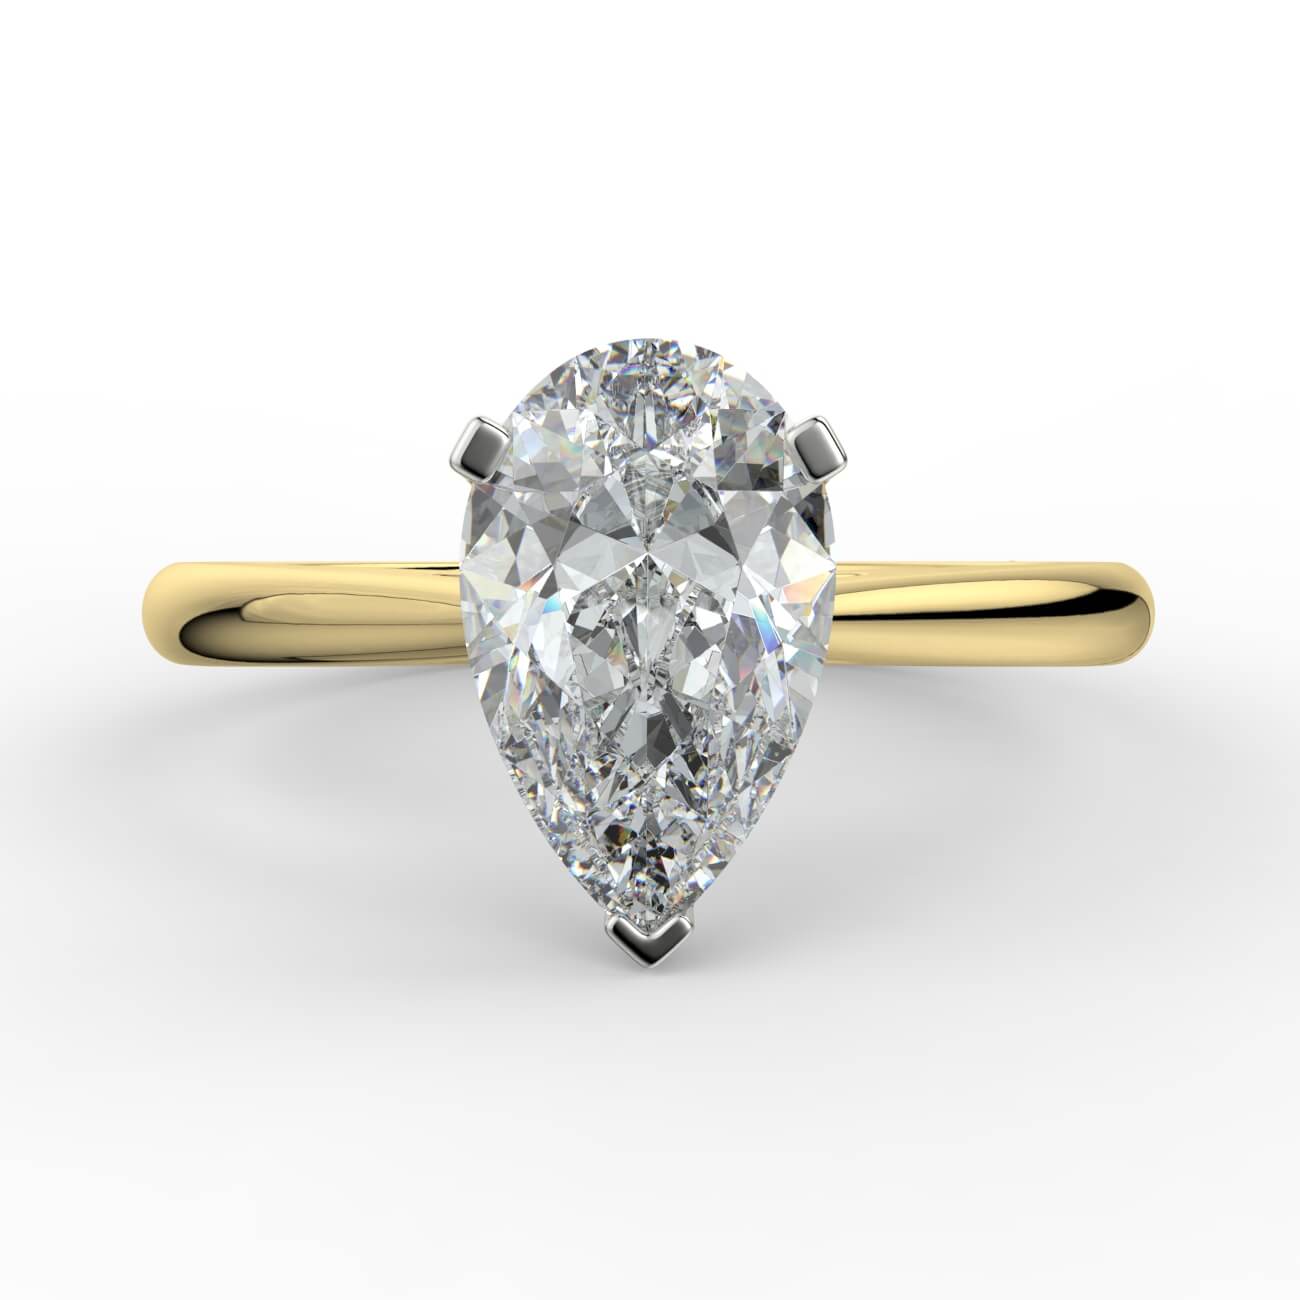 Pear cut diamond cathedral engagement ring in white and yellow gold – Australian Diamond Network